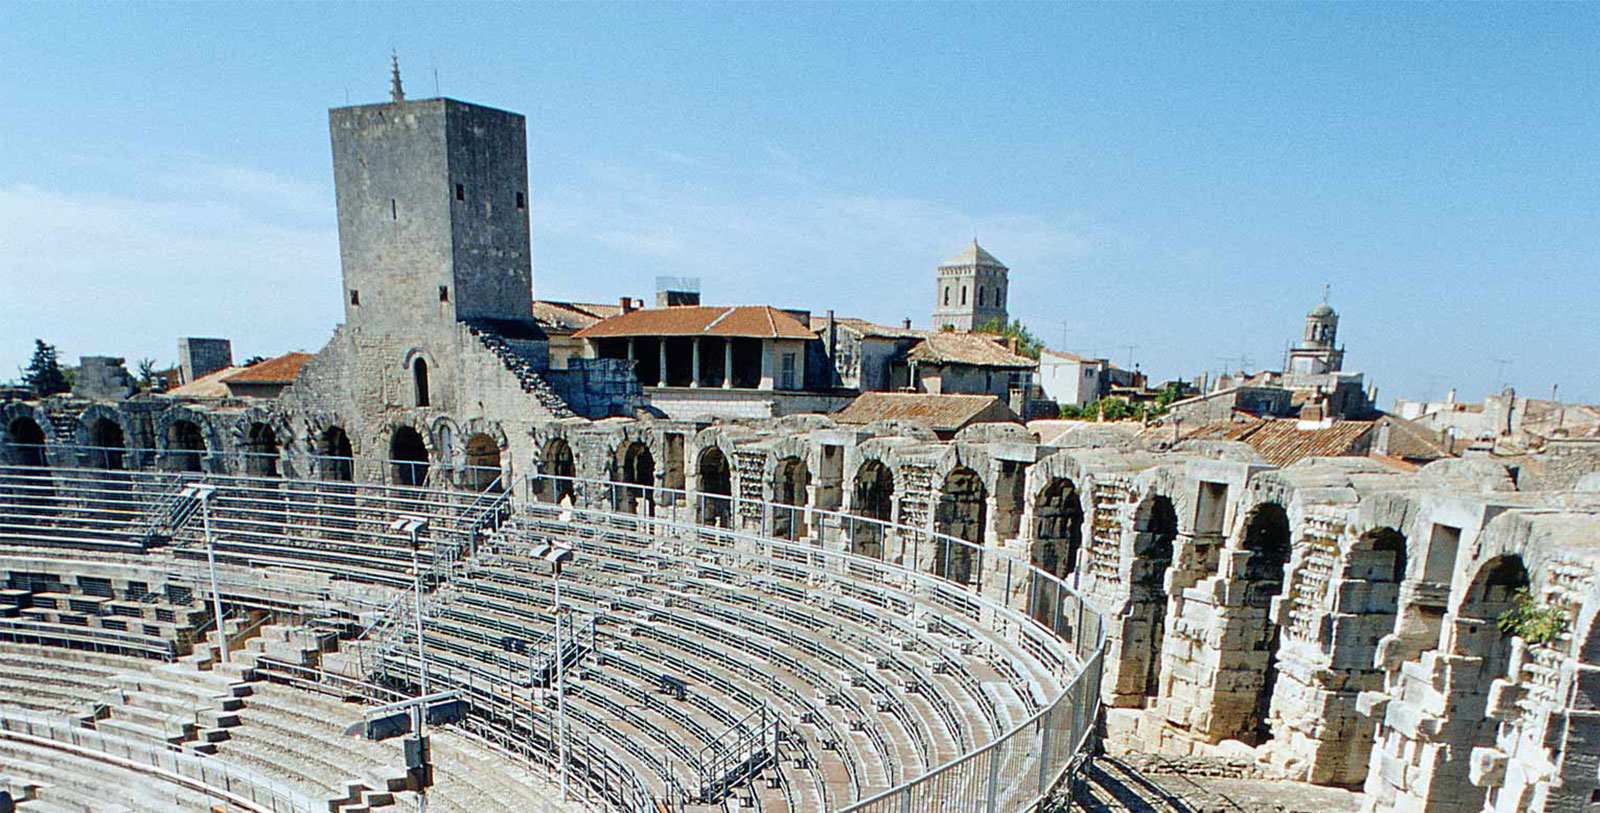 Visit to the Arles Amphitheatre, the Tour des Mourgues, and the Roman Theater of Arles just minutes away.